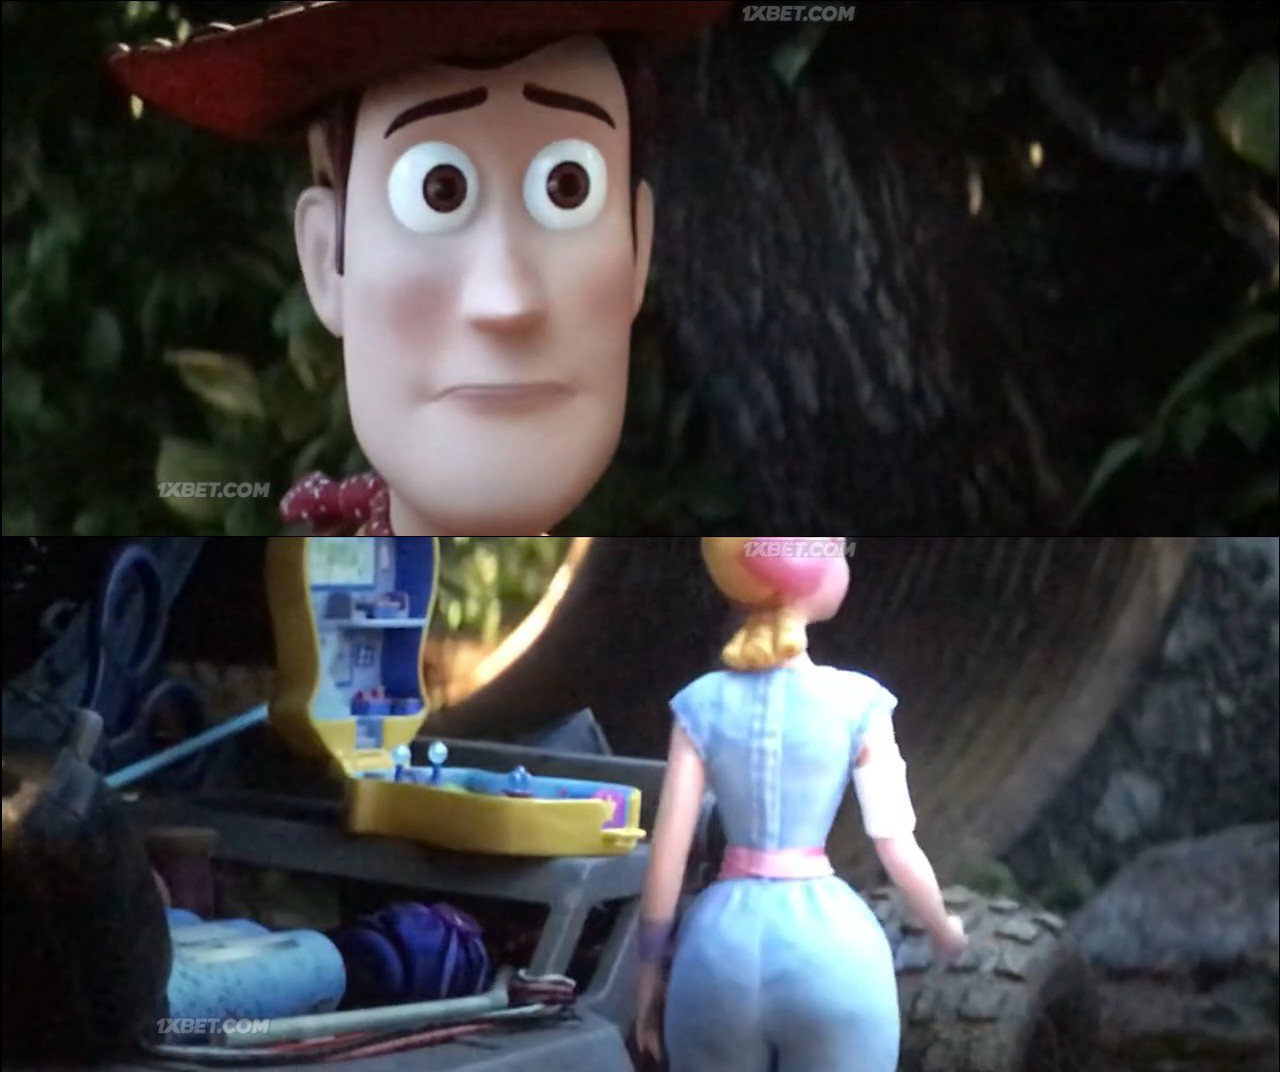 It's like we never know Bo Peep is thicc under the dress until... 